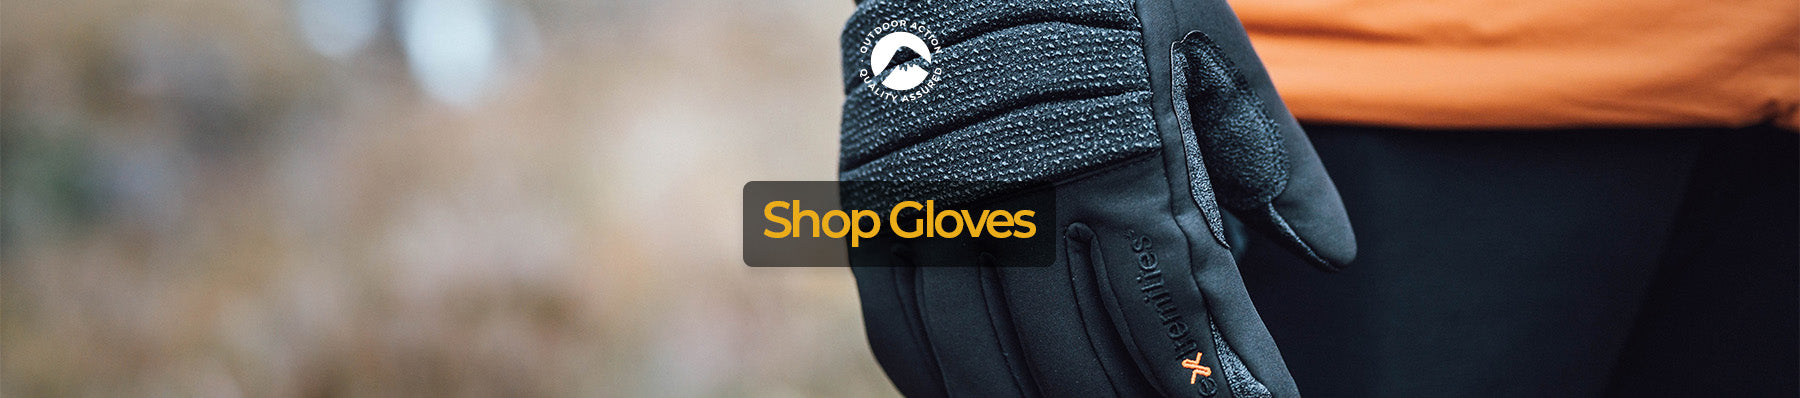 Shop Gloves online at Outdoor Action